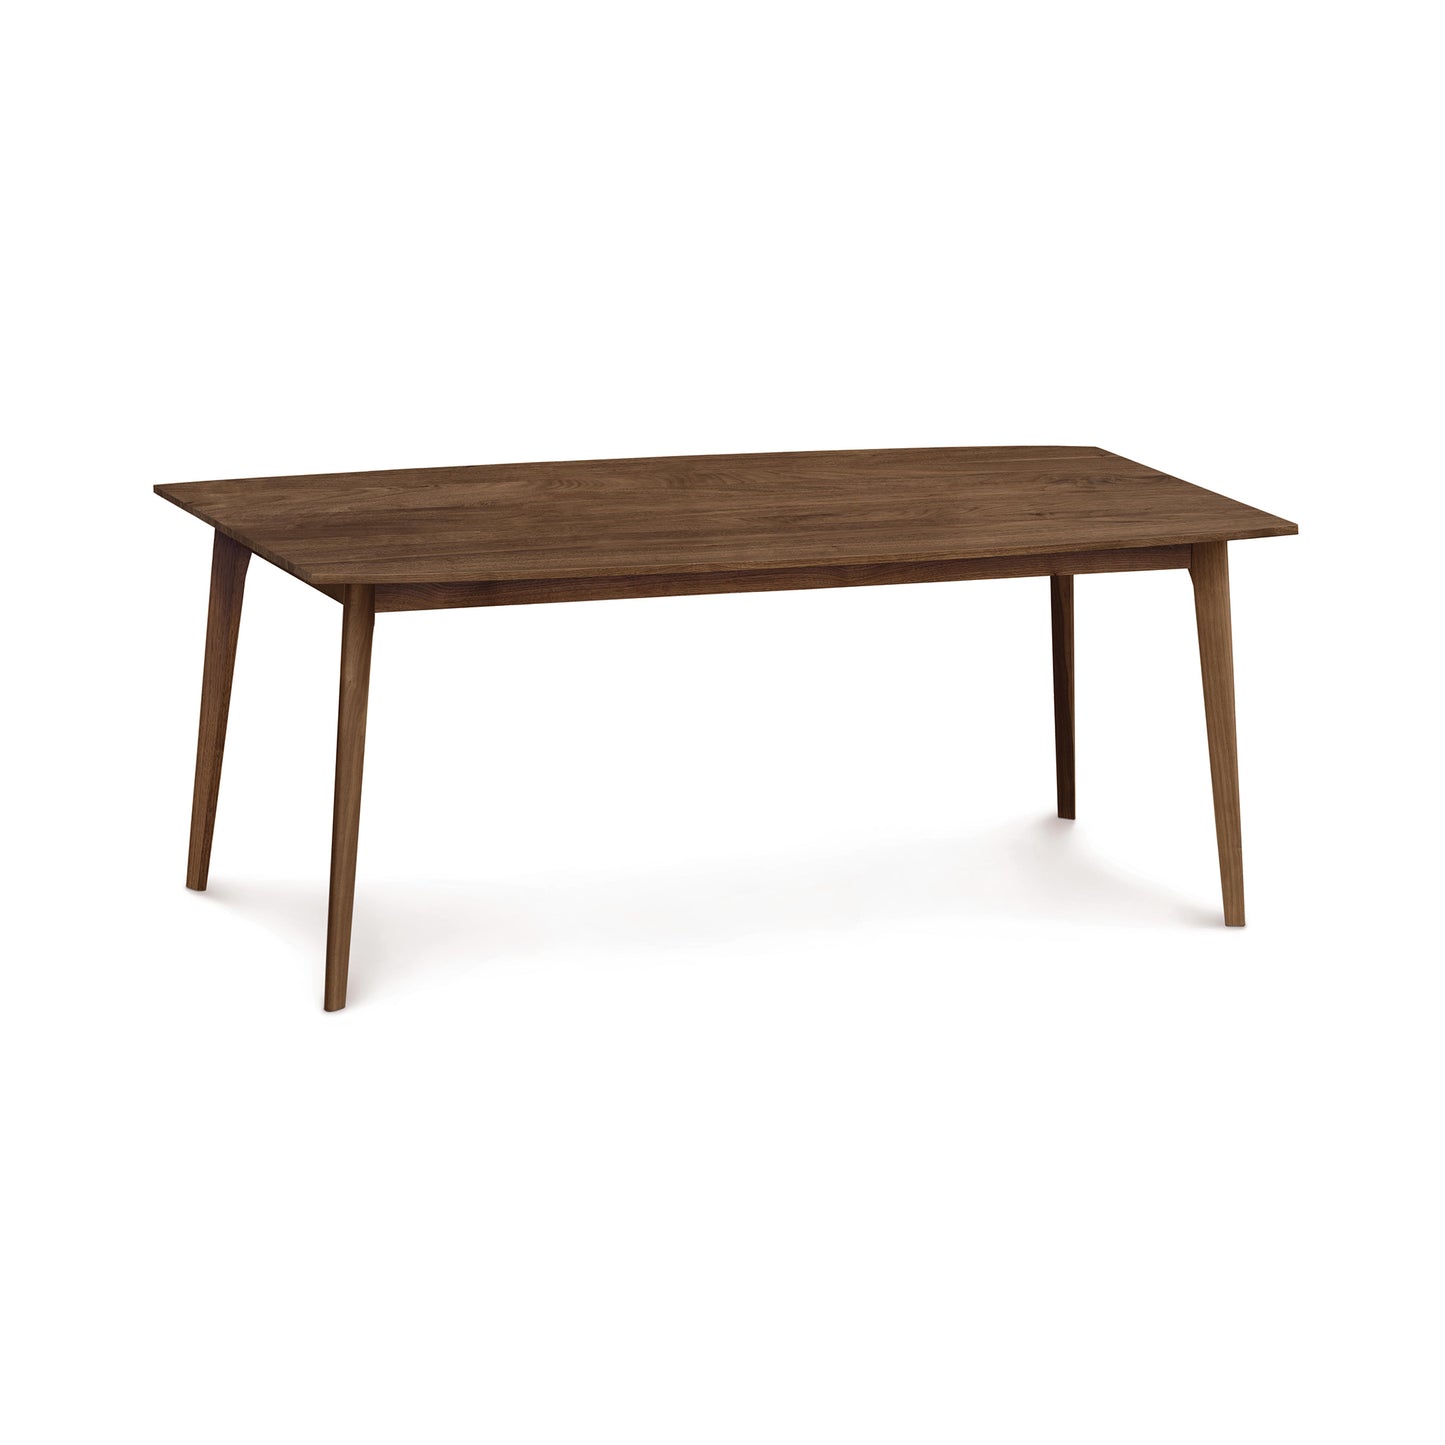 Catalina Solid-Top Table by Copeland Furniture isolated on a white background.